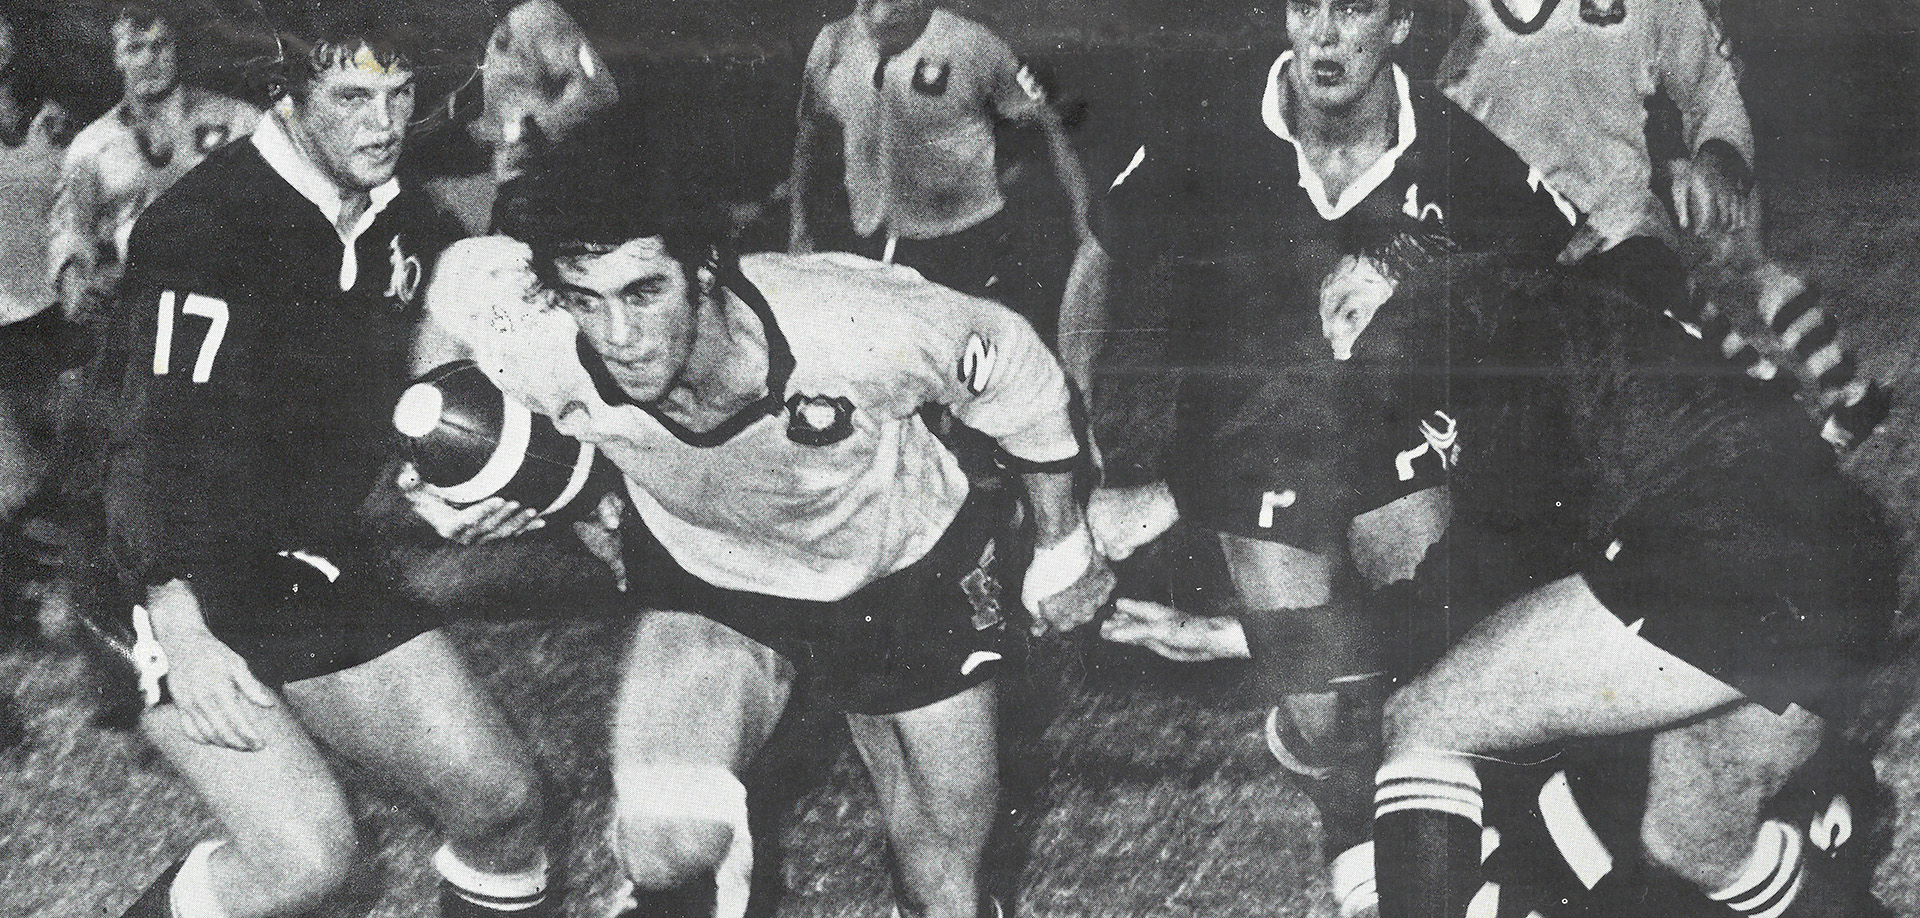 Terry Fahey Scores for NSW, May 30th 1978. Courtesy of Queensland Rugby League History Committee.